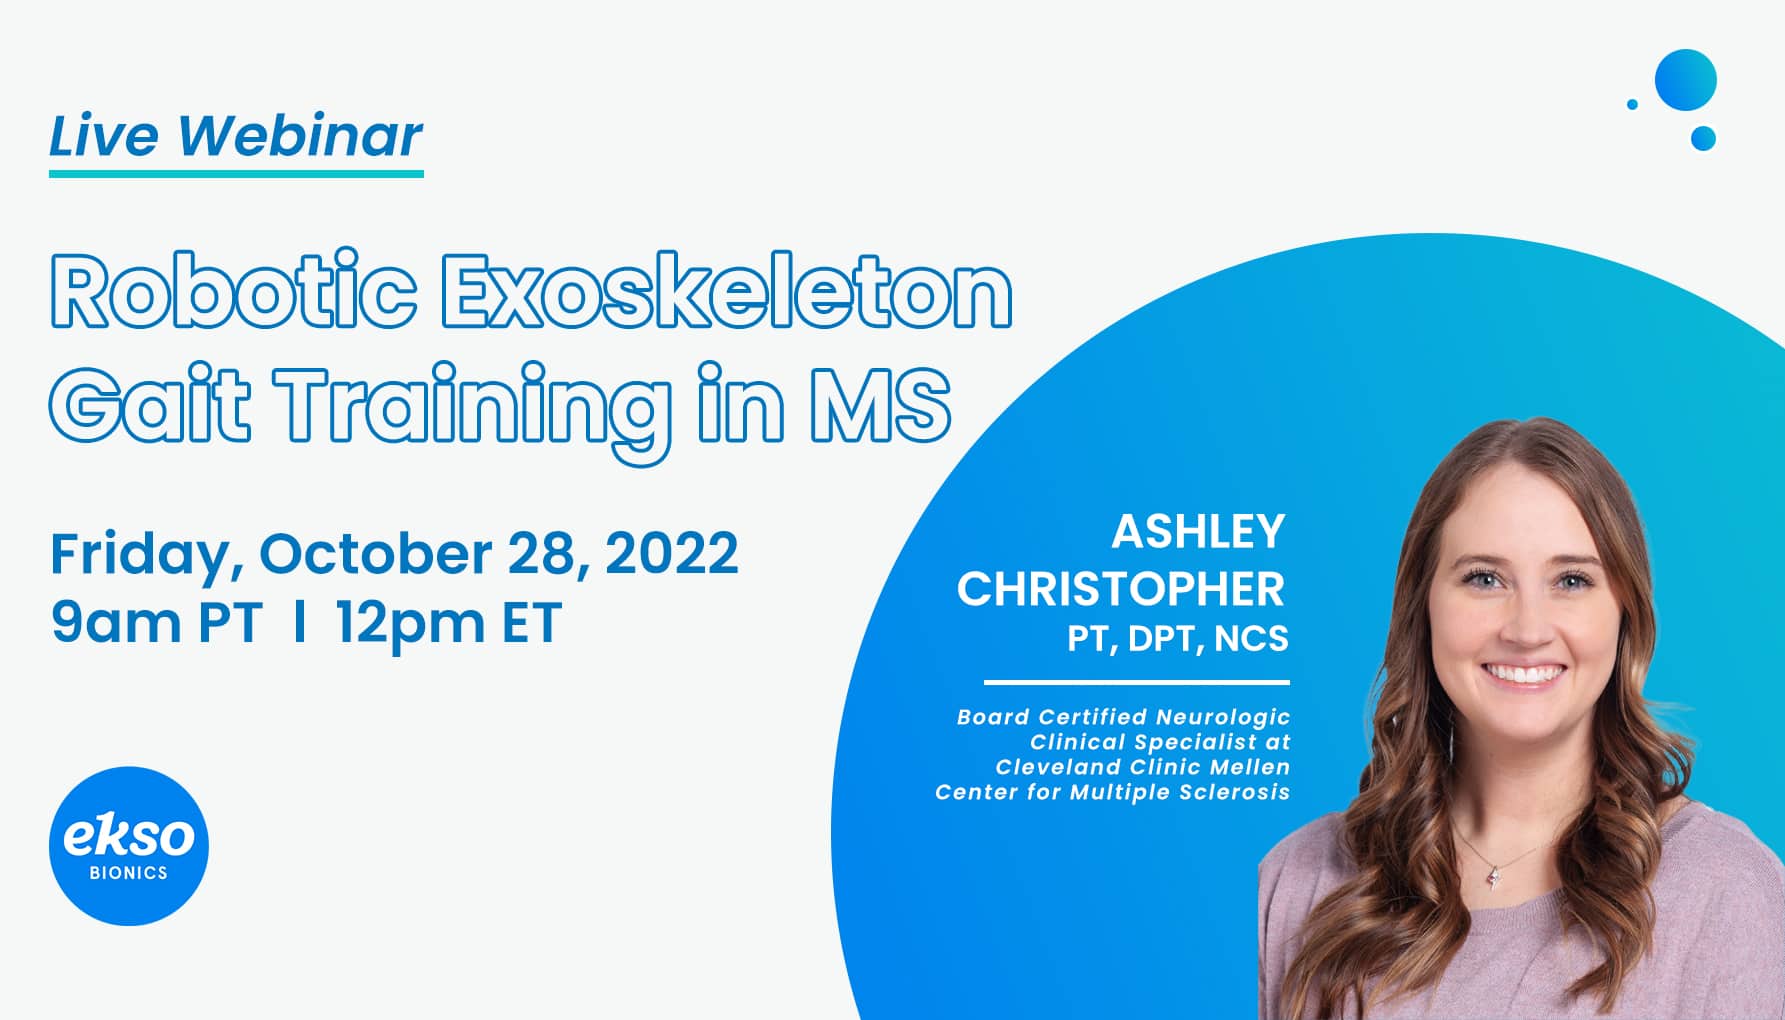 Cleveland Clinic – Robotic Exoskeleton Gait Training in MS with Ashley Christopher PT, DPT, NCS from Cleveland Clinic